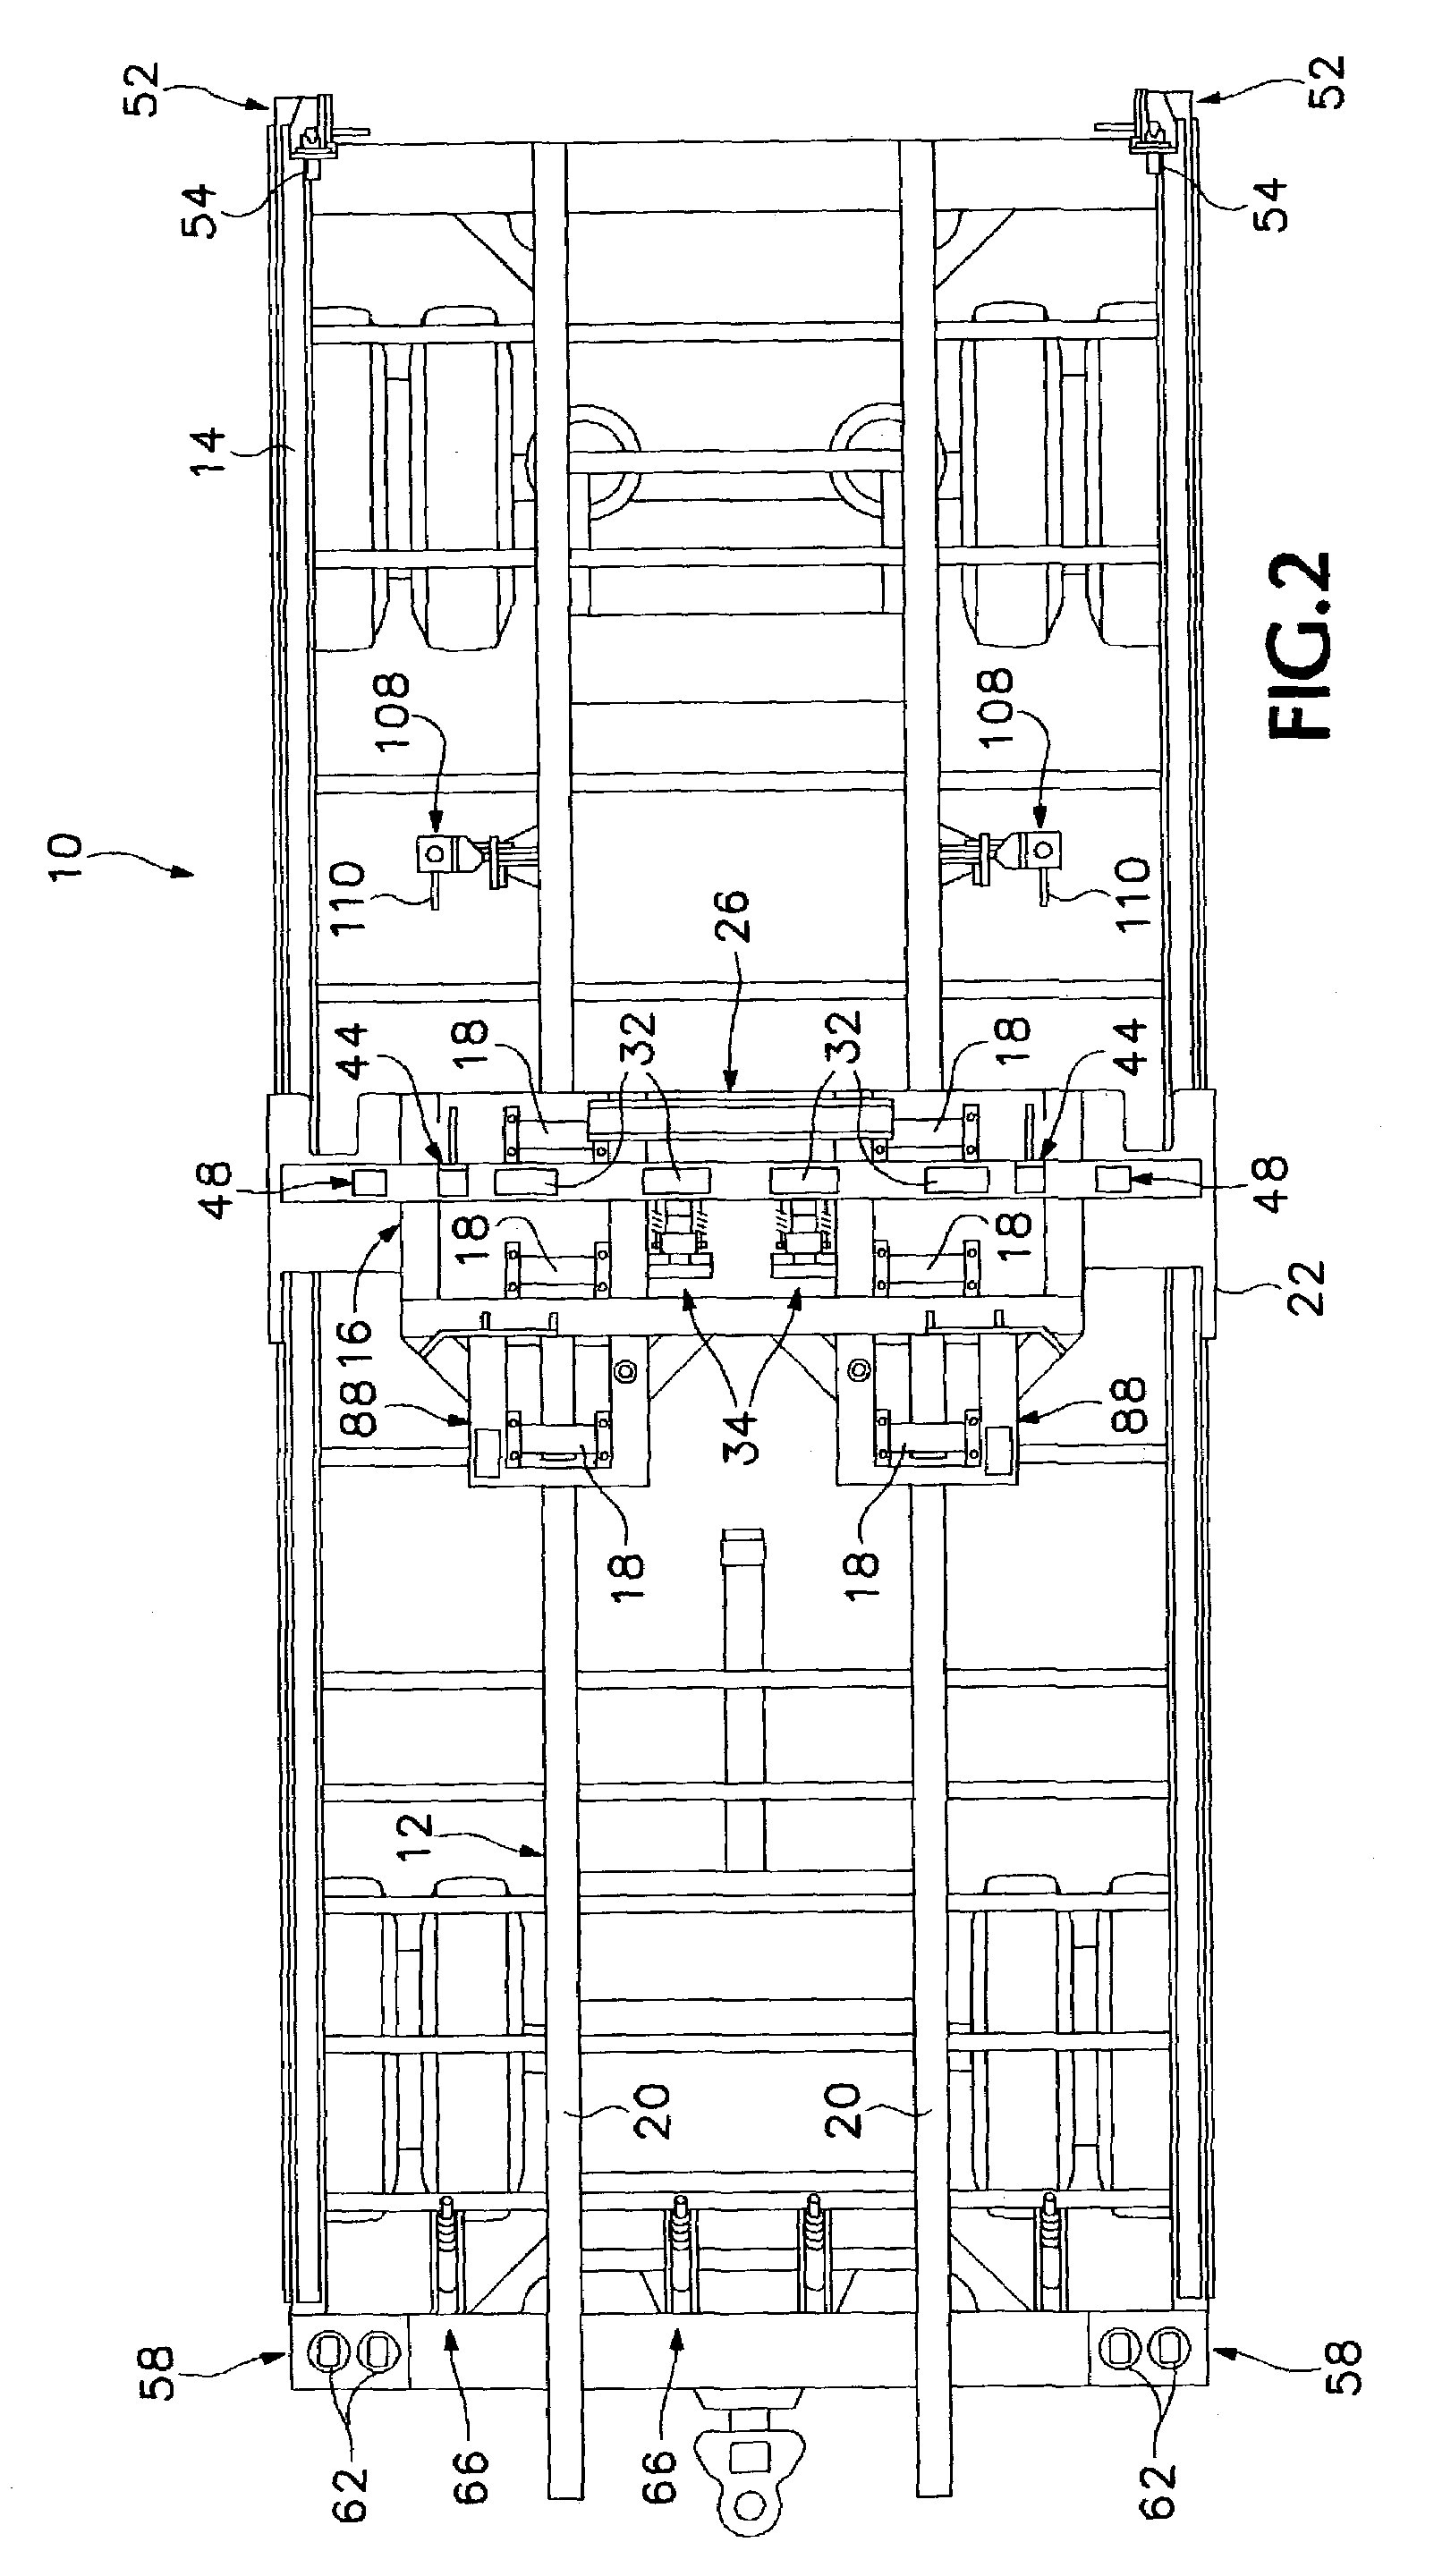 Apparatus for transferring containers and flat racks from a truck to a trailer